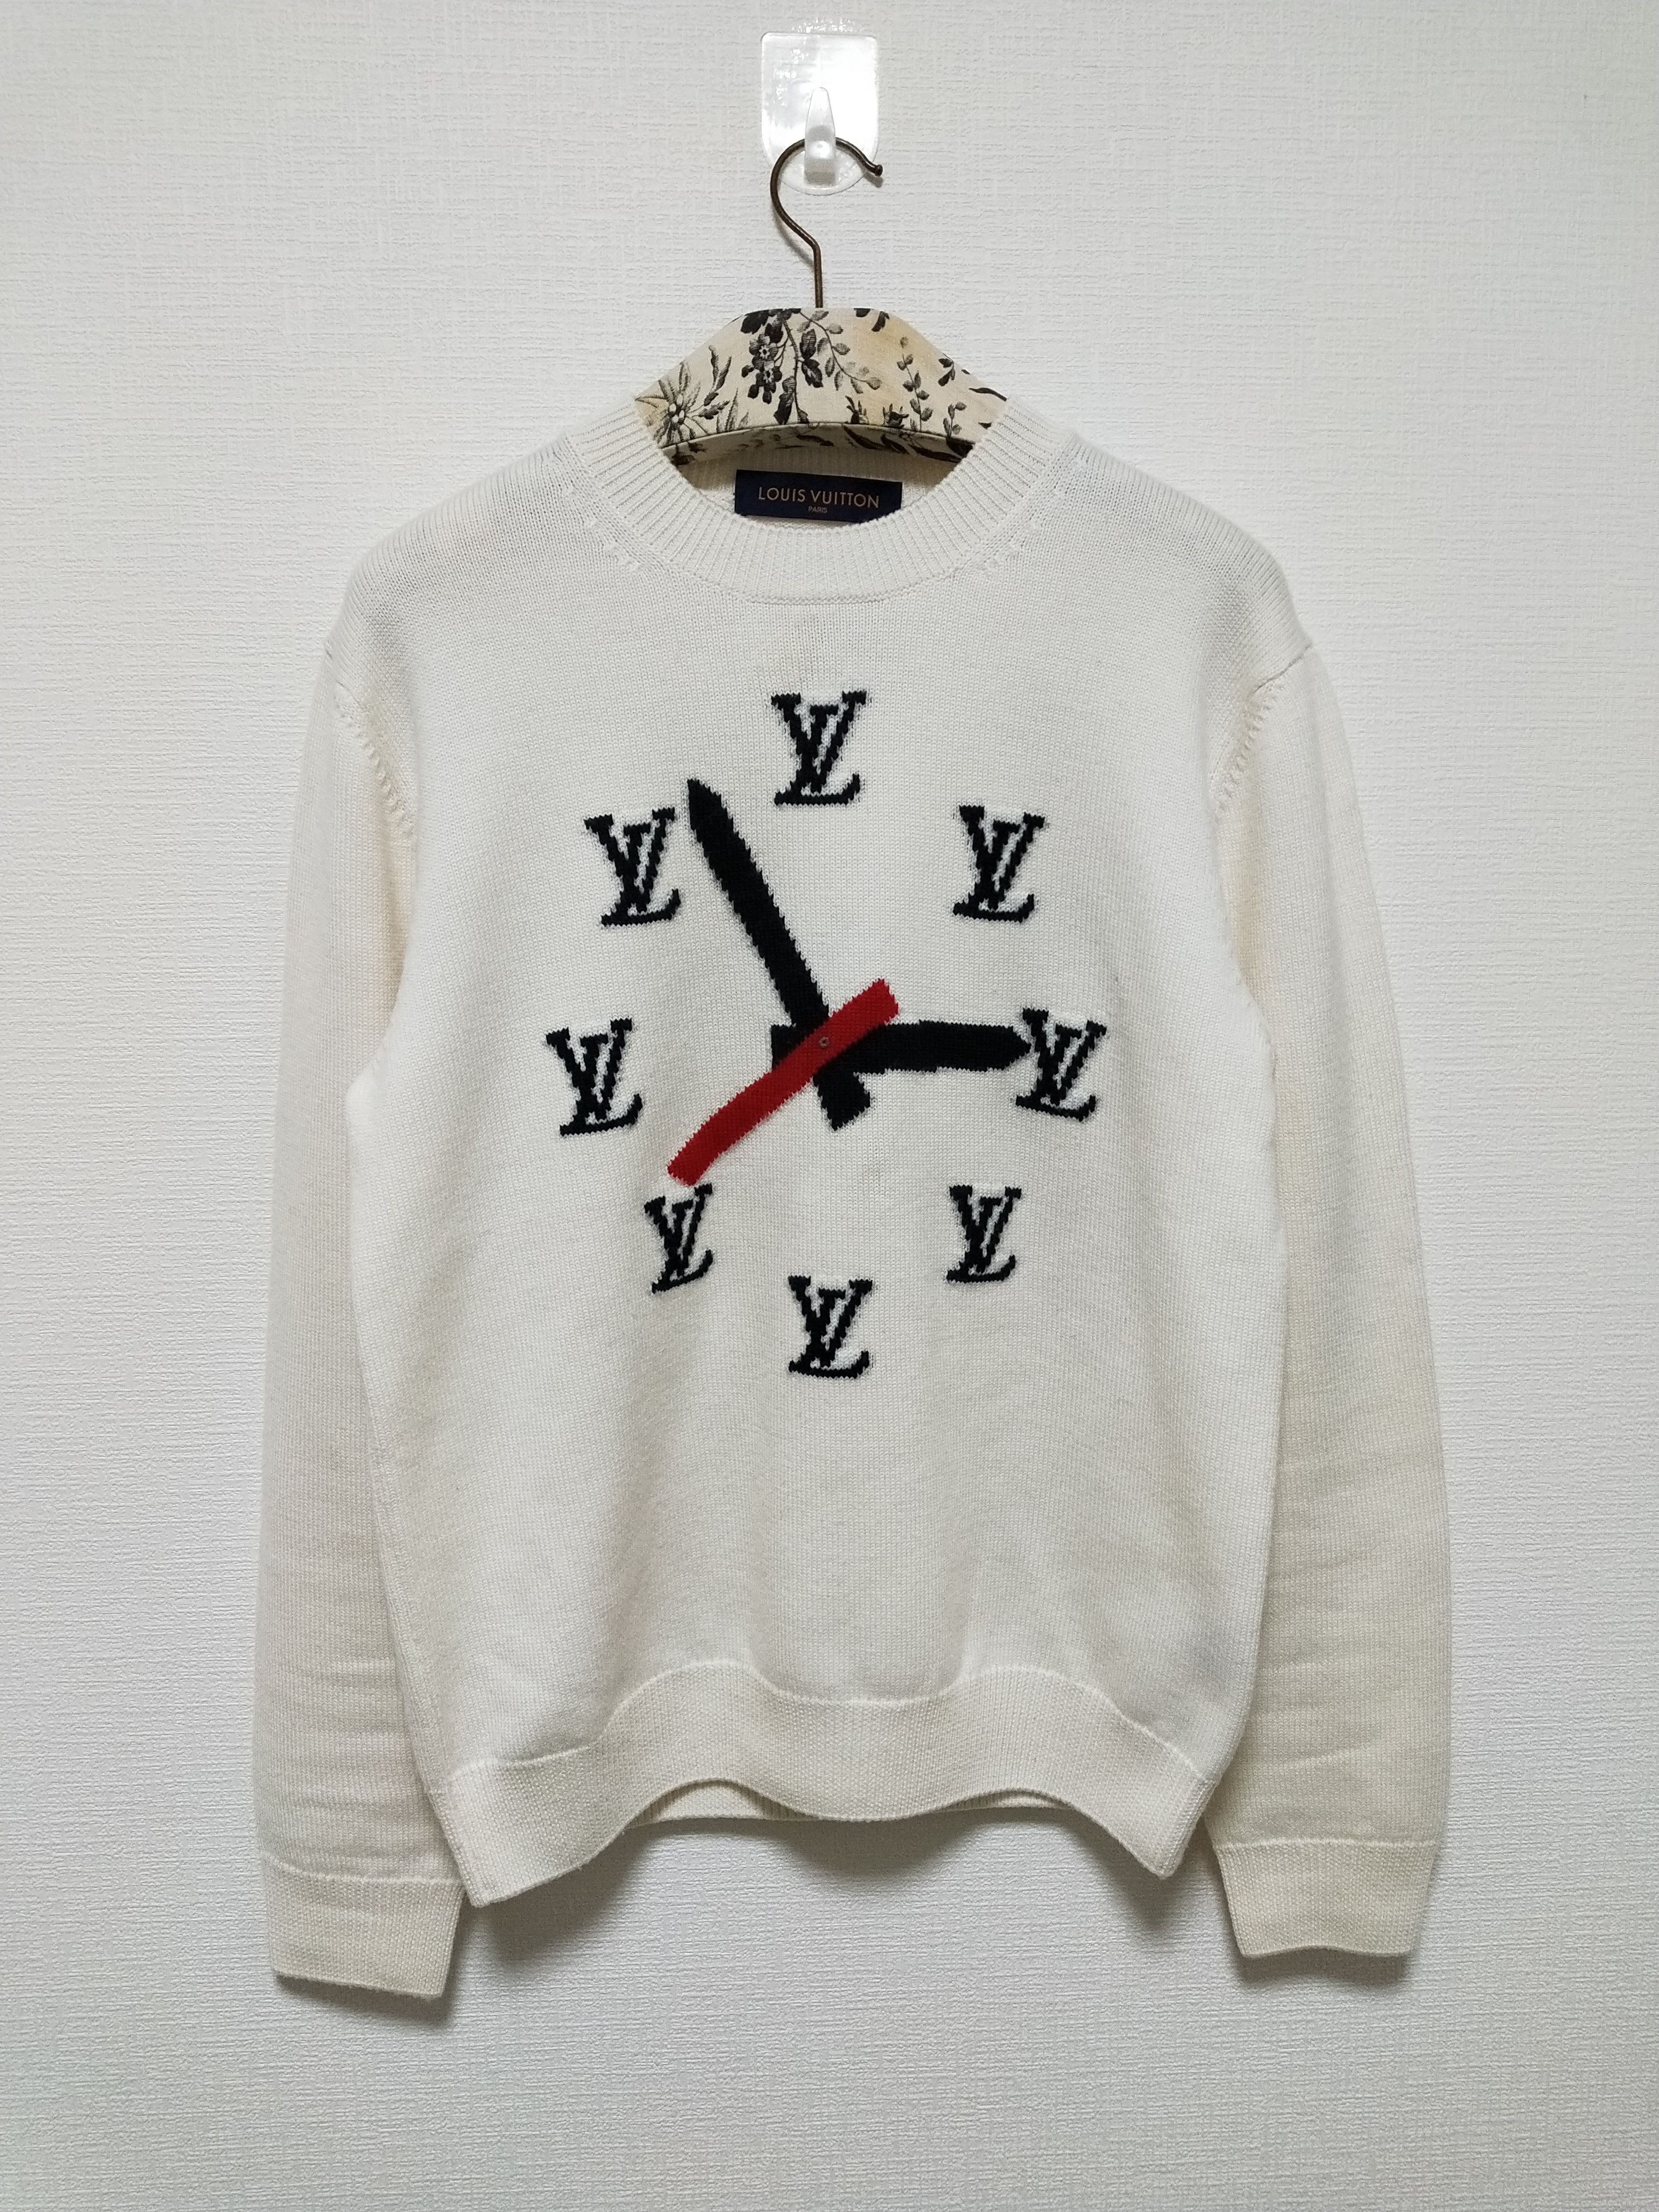 SS21 Louis Vuitton by Virgil Abloh 'Clock' Intarsia Wool Knit Sweater